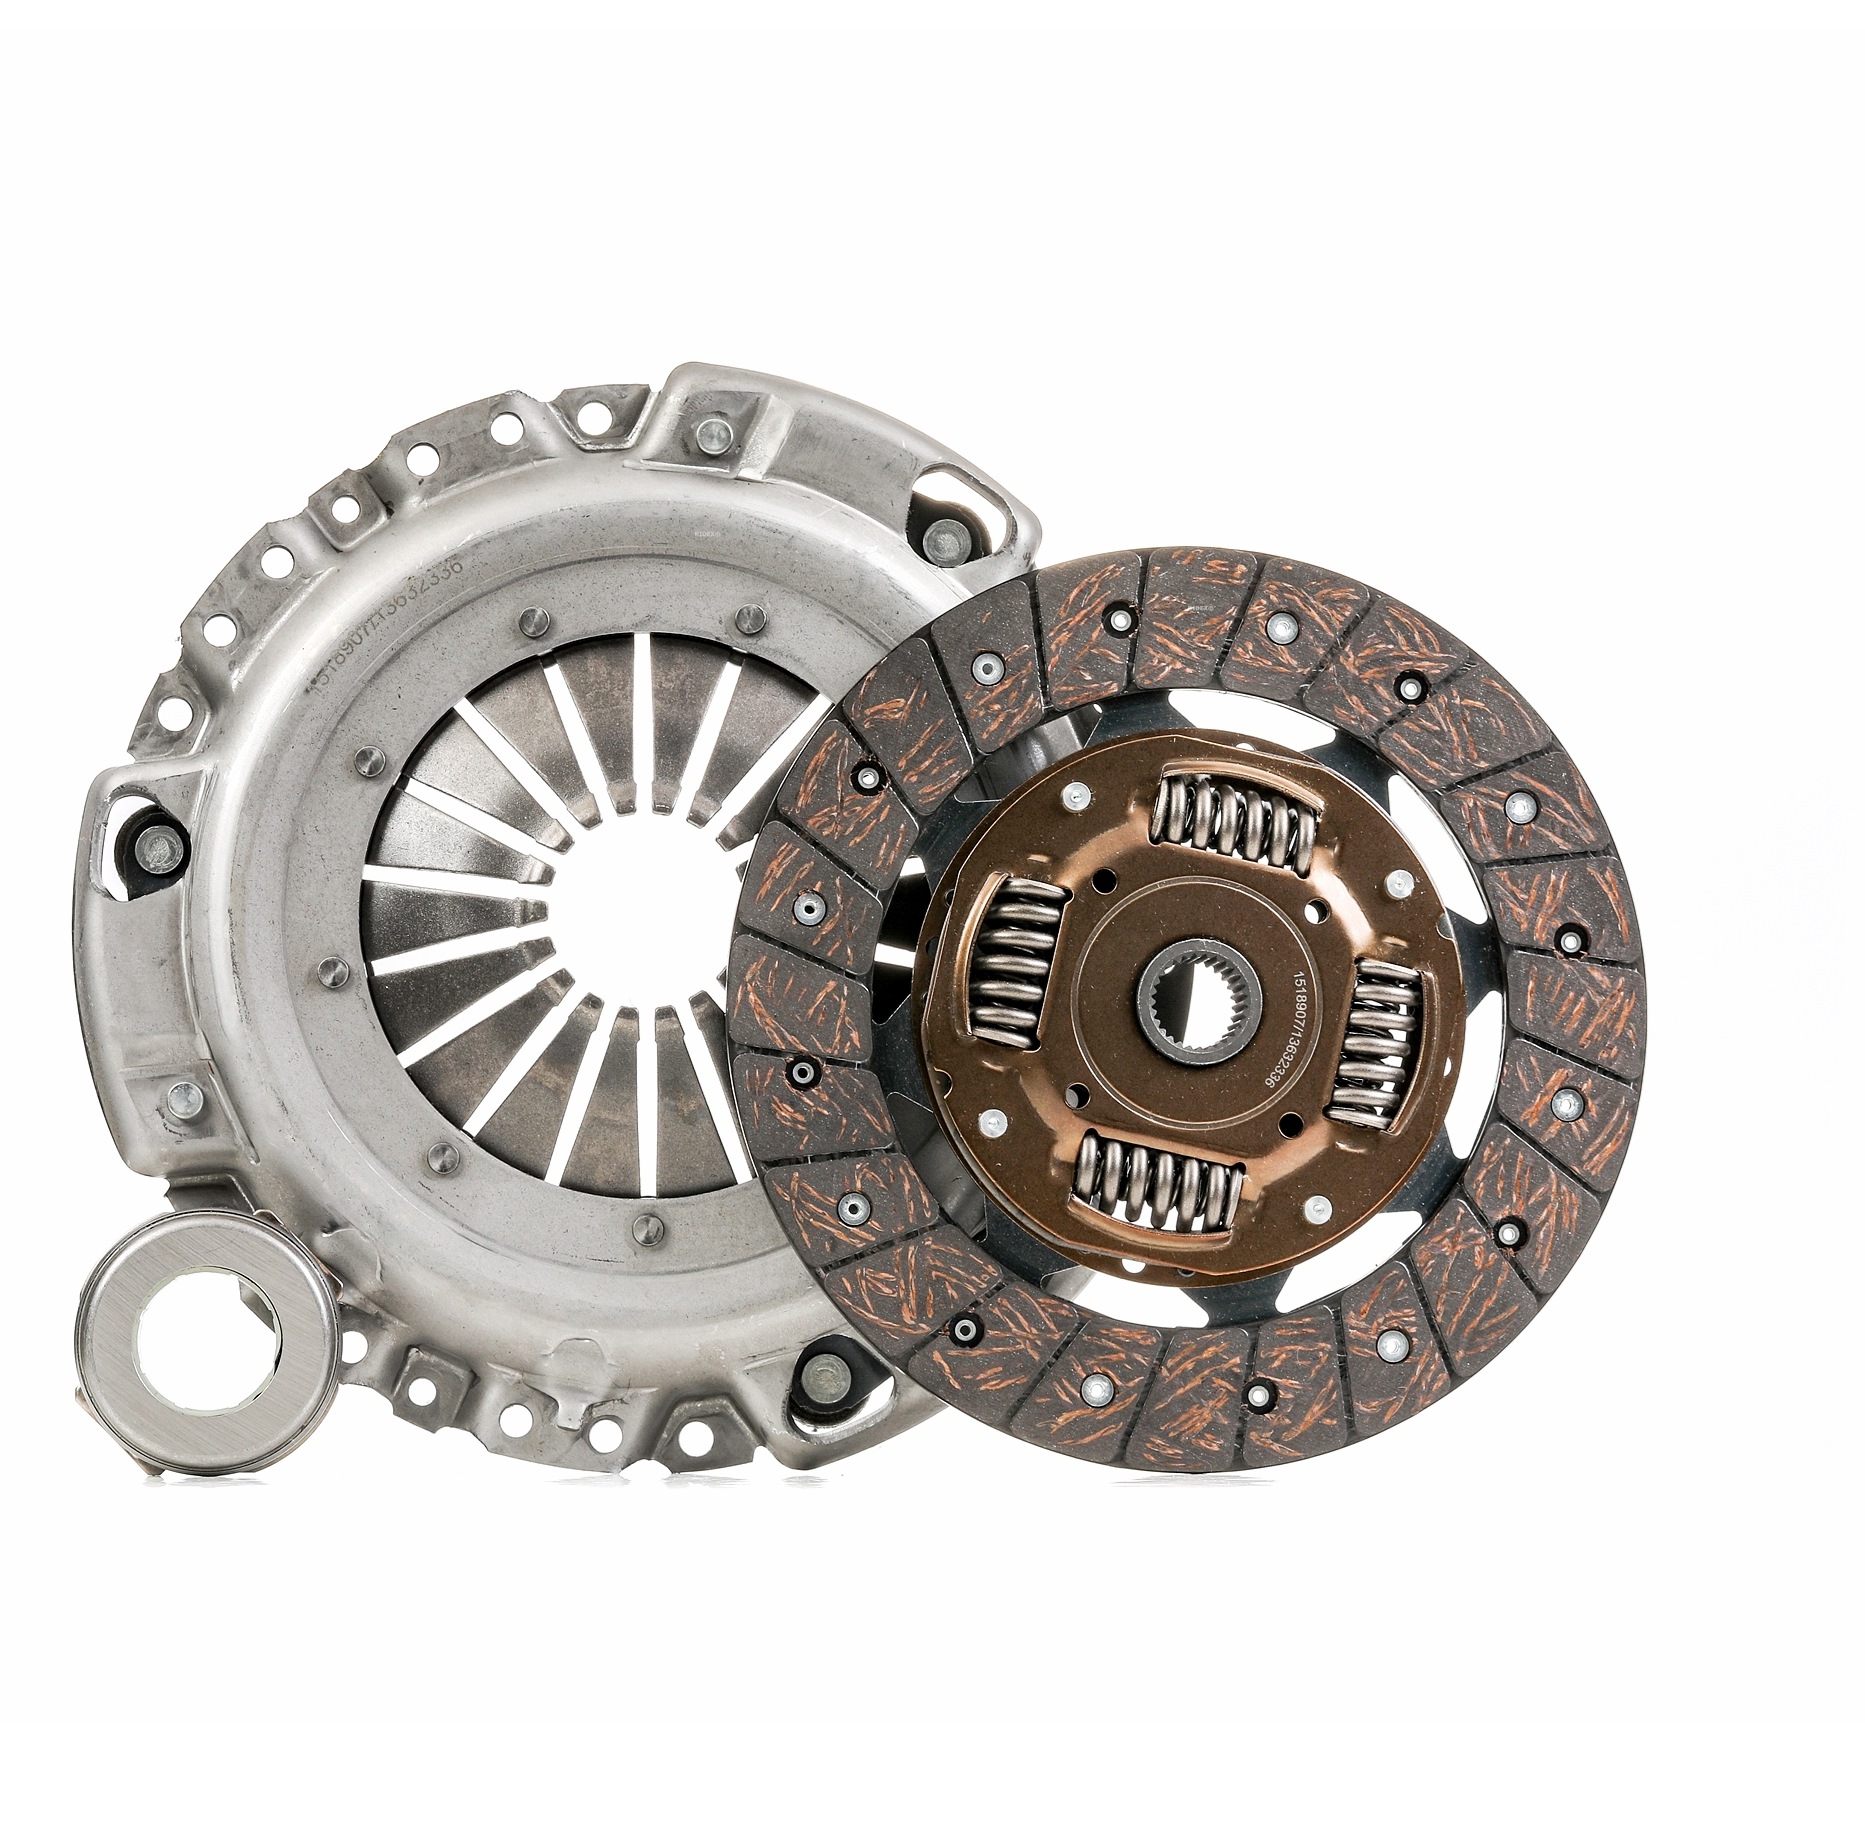 Clutch kit for Golf 4 1.8 4motion 125 hp Petrol 92 kW 1998 - 2005